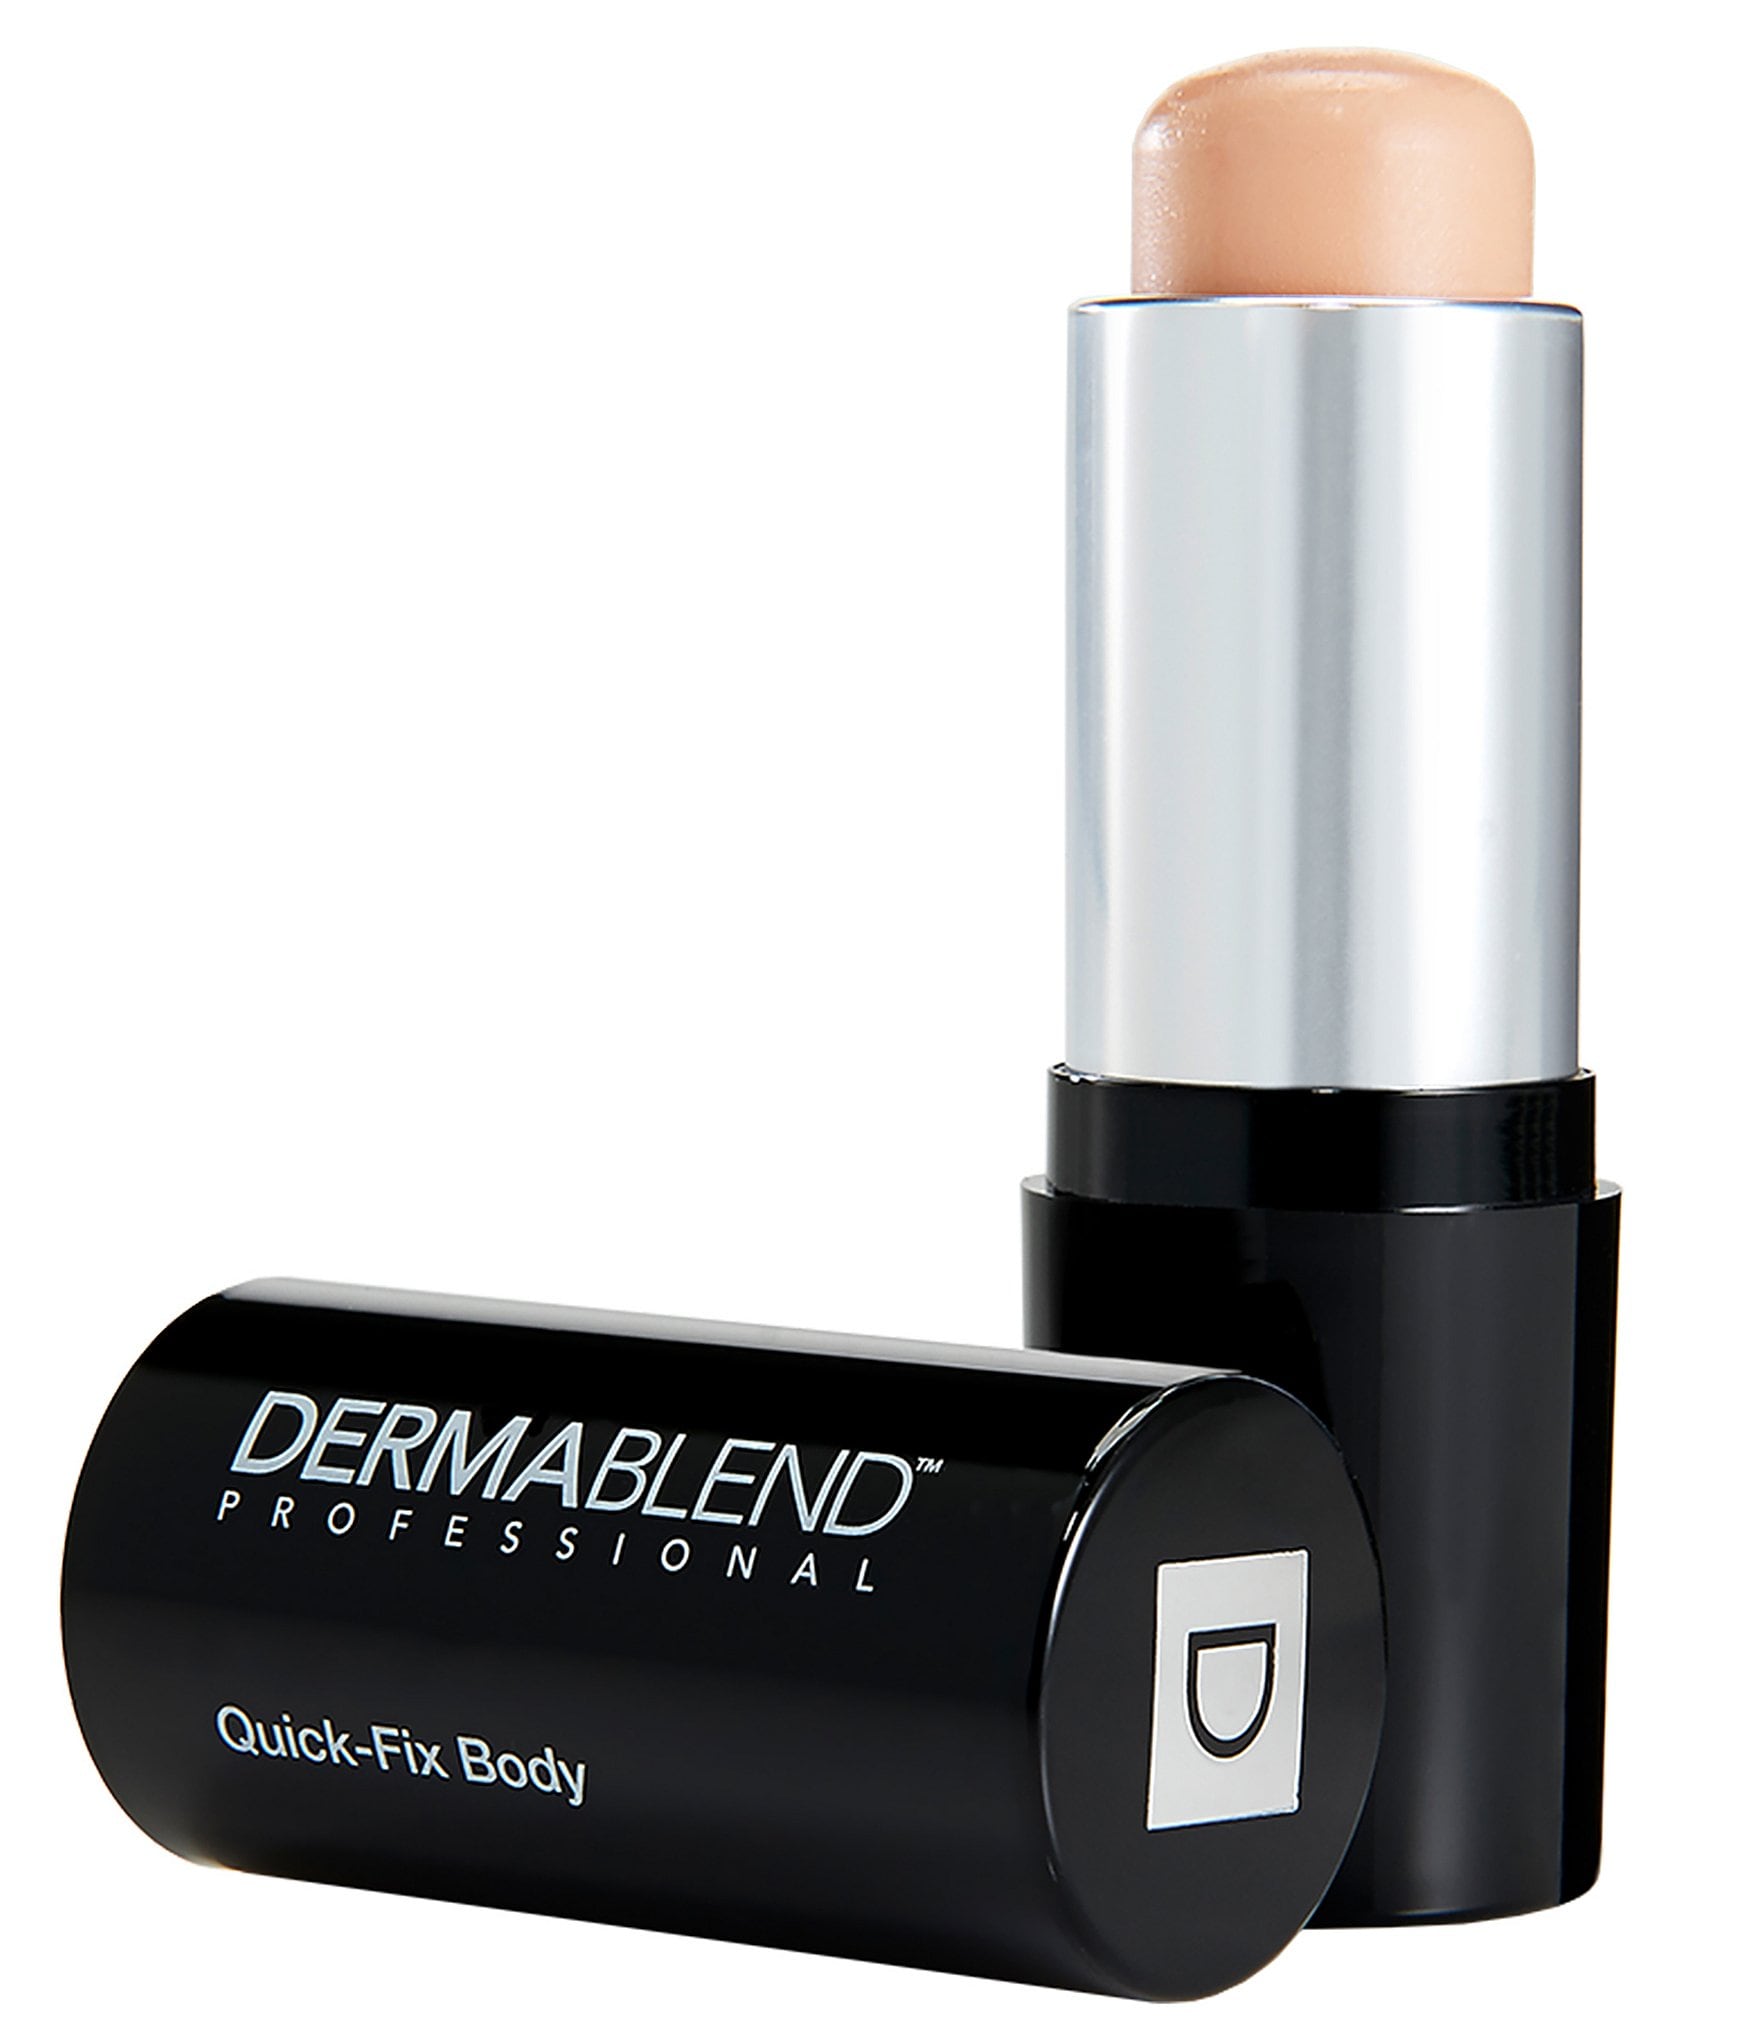 Buy Dermablend Quick-Fix Body Makeup Full Coverage Foundation Stick,  Water-Resistant Body Concealer for Imperfections & Tattoos, 0.42 Oz Online  at Lowest Price Ever in India | Check Reviews & Ratings - Shop